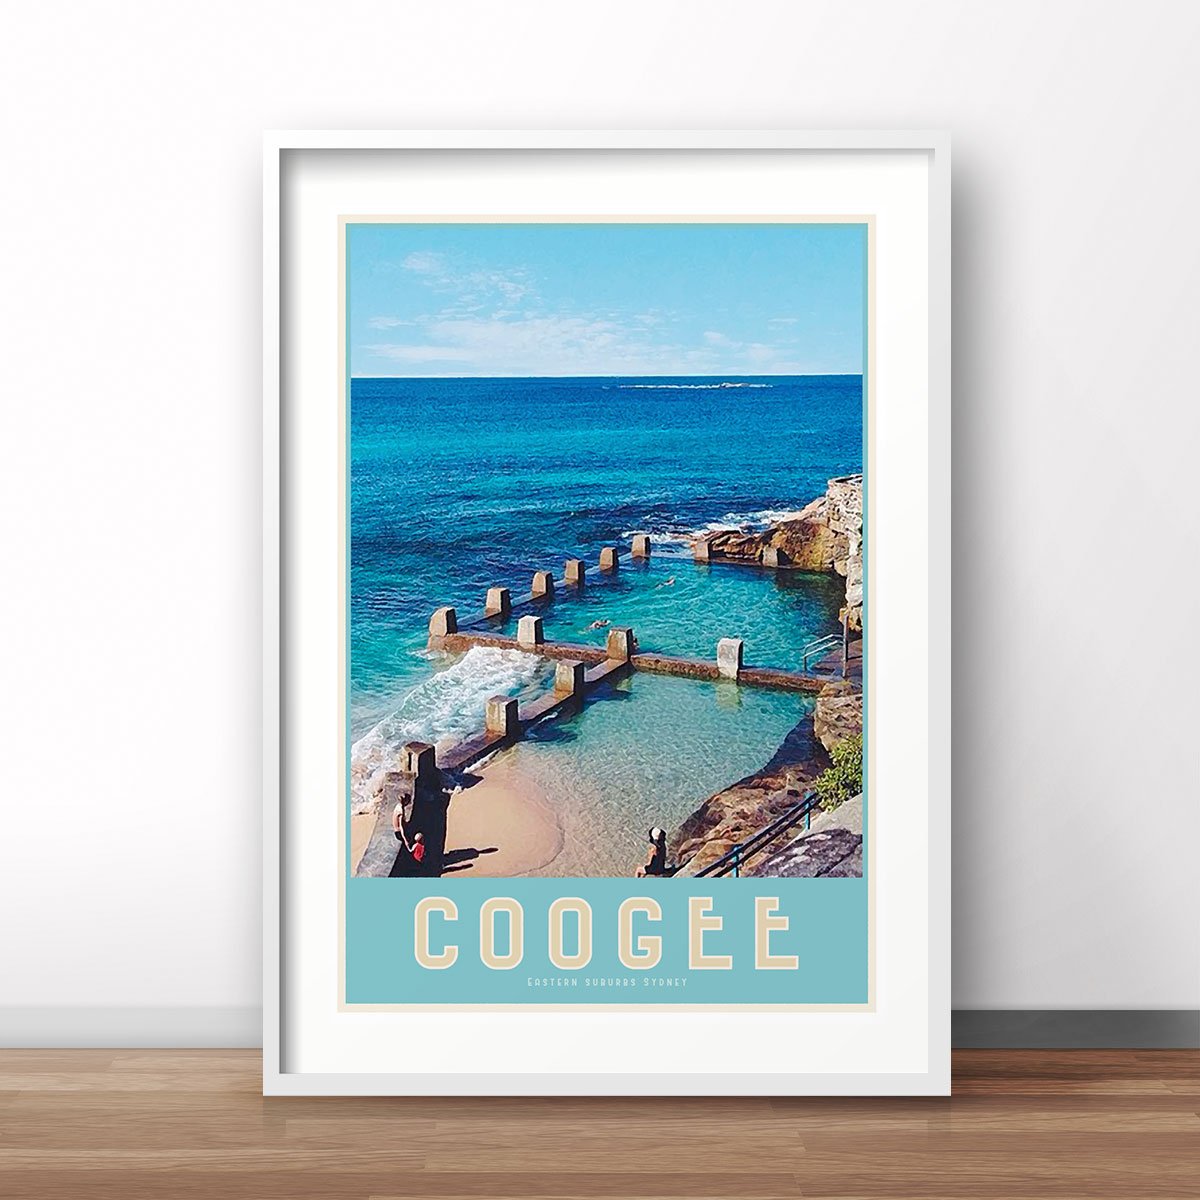 Coogee Pool vintage travel style white framed prints by places we luv